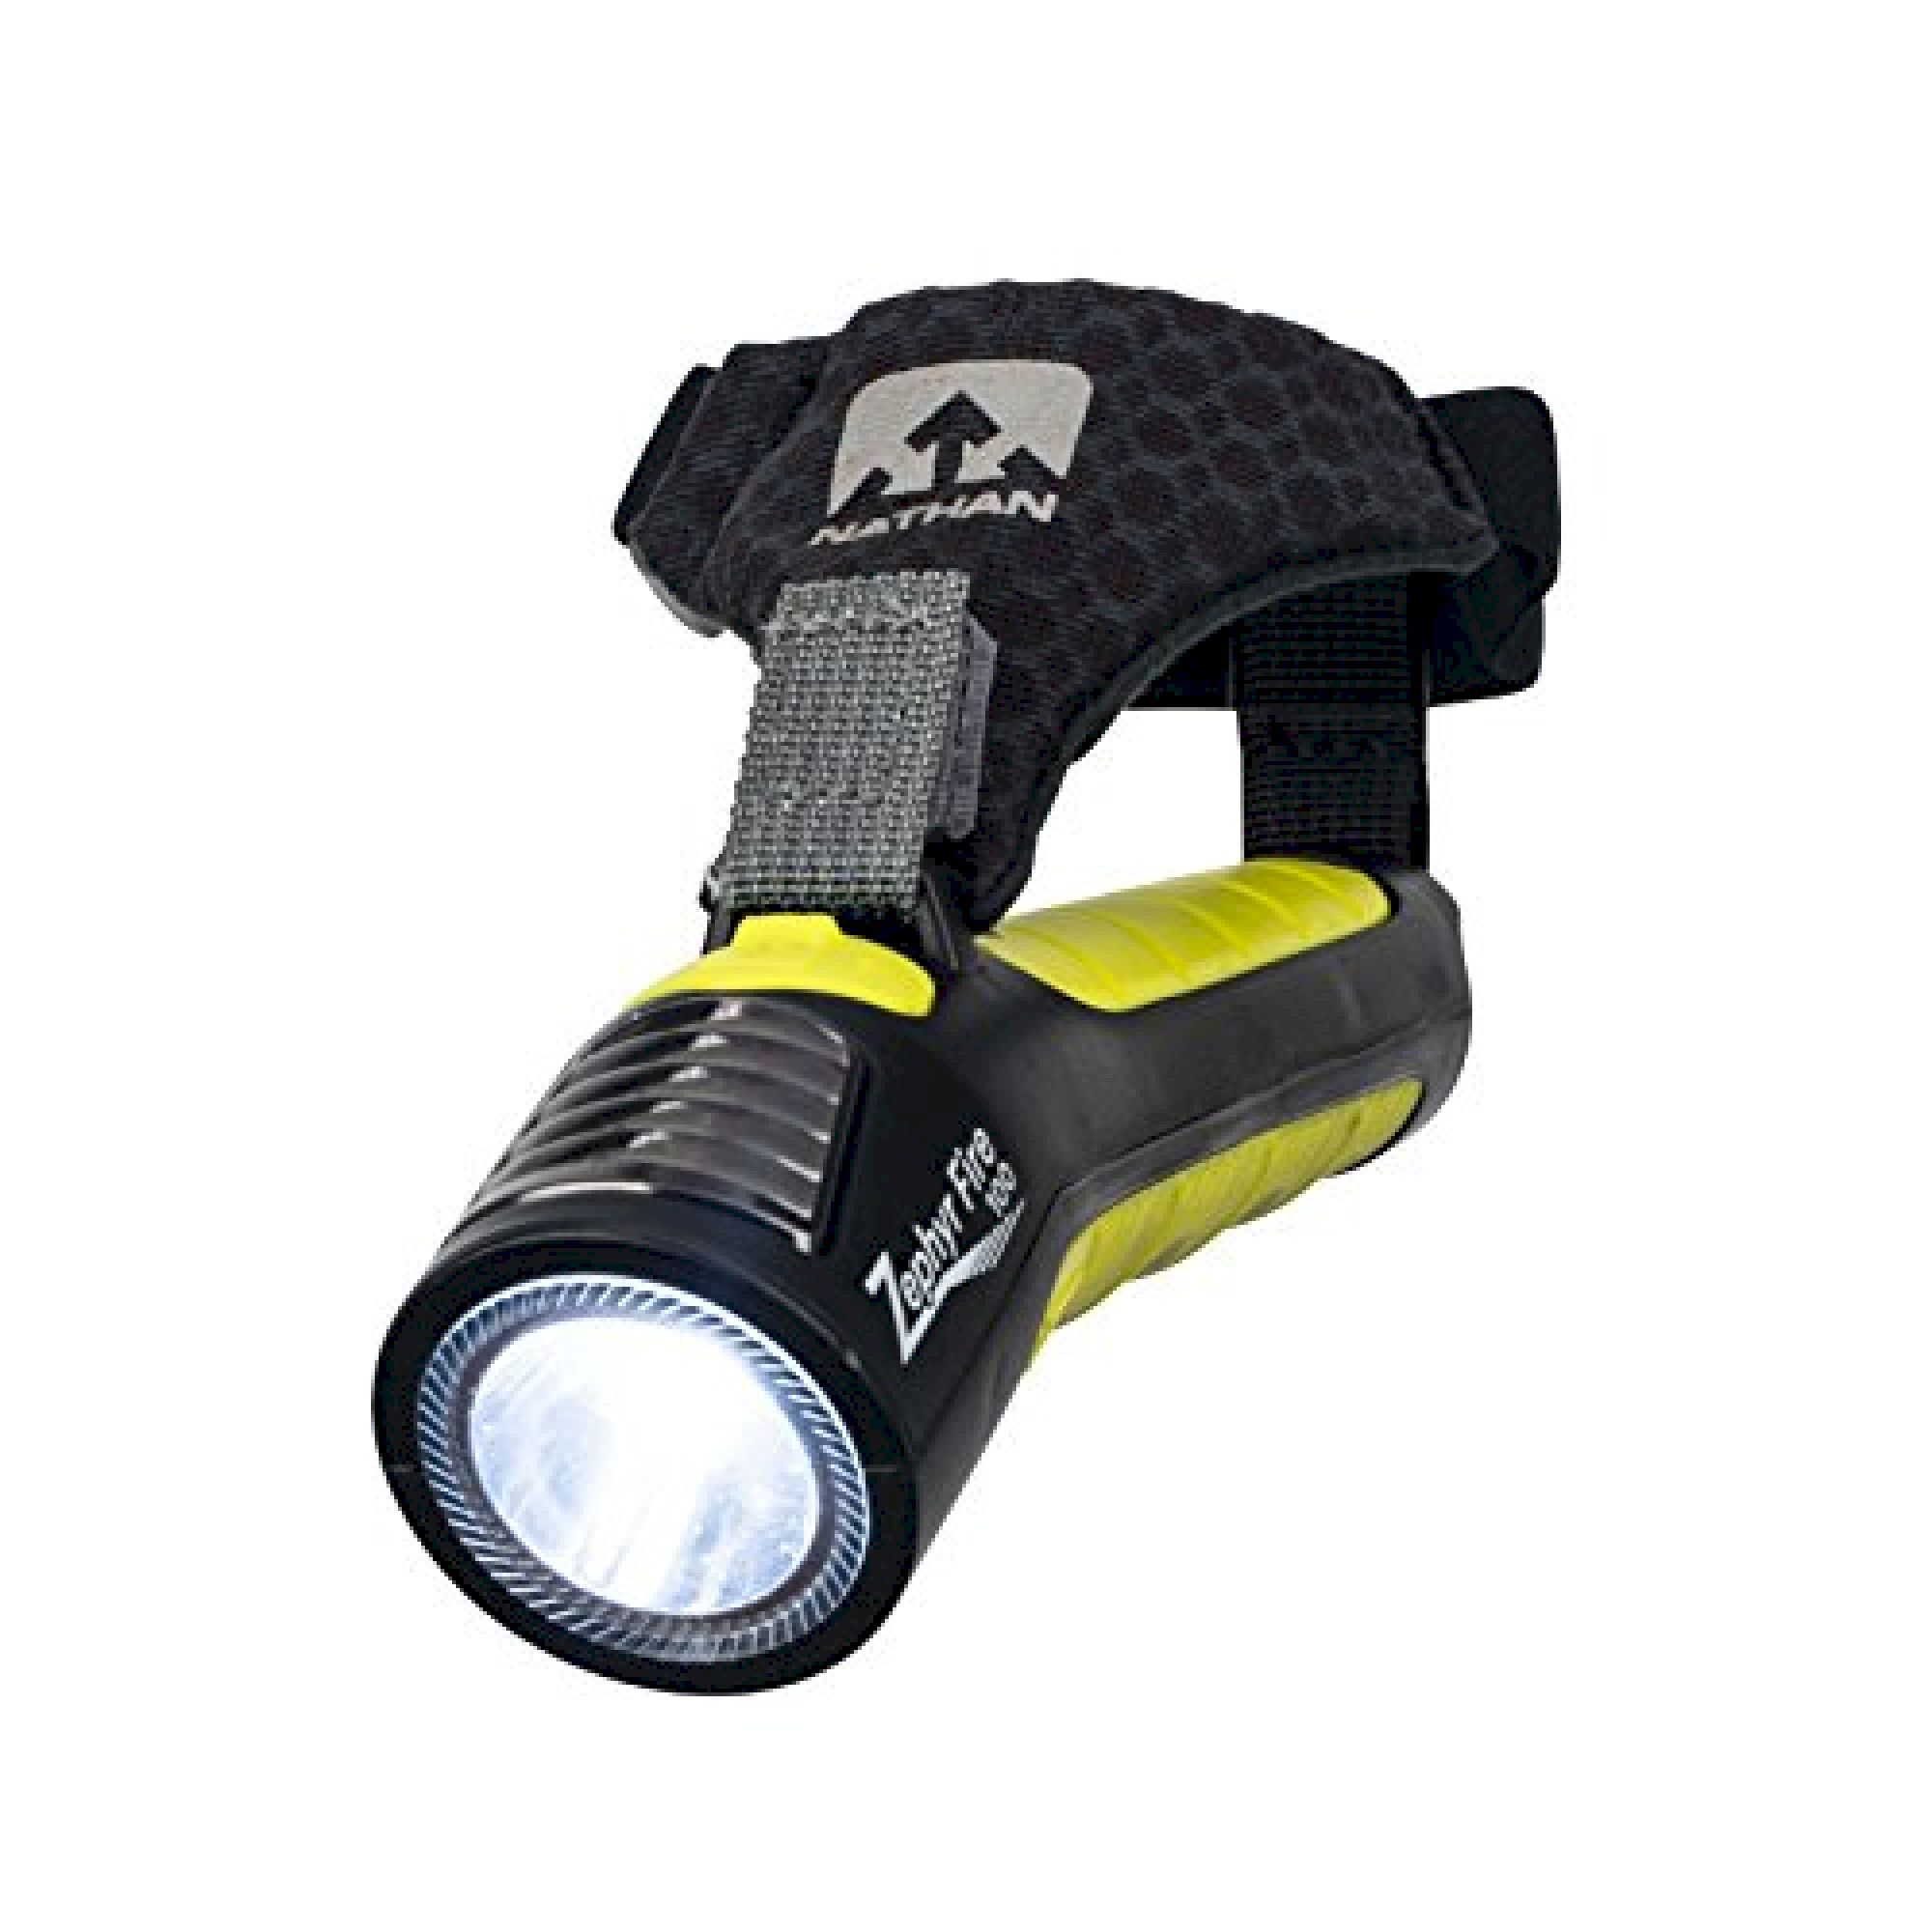 Nathan Zephyr Fire 100 Hand Torch - Lampe torche | Hardloop